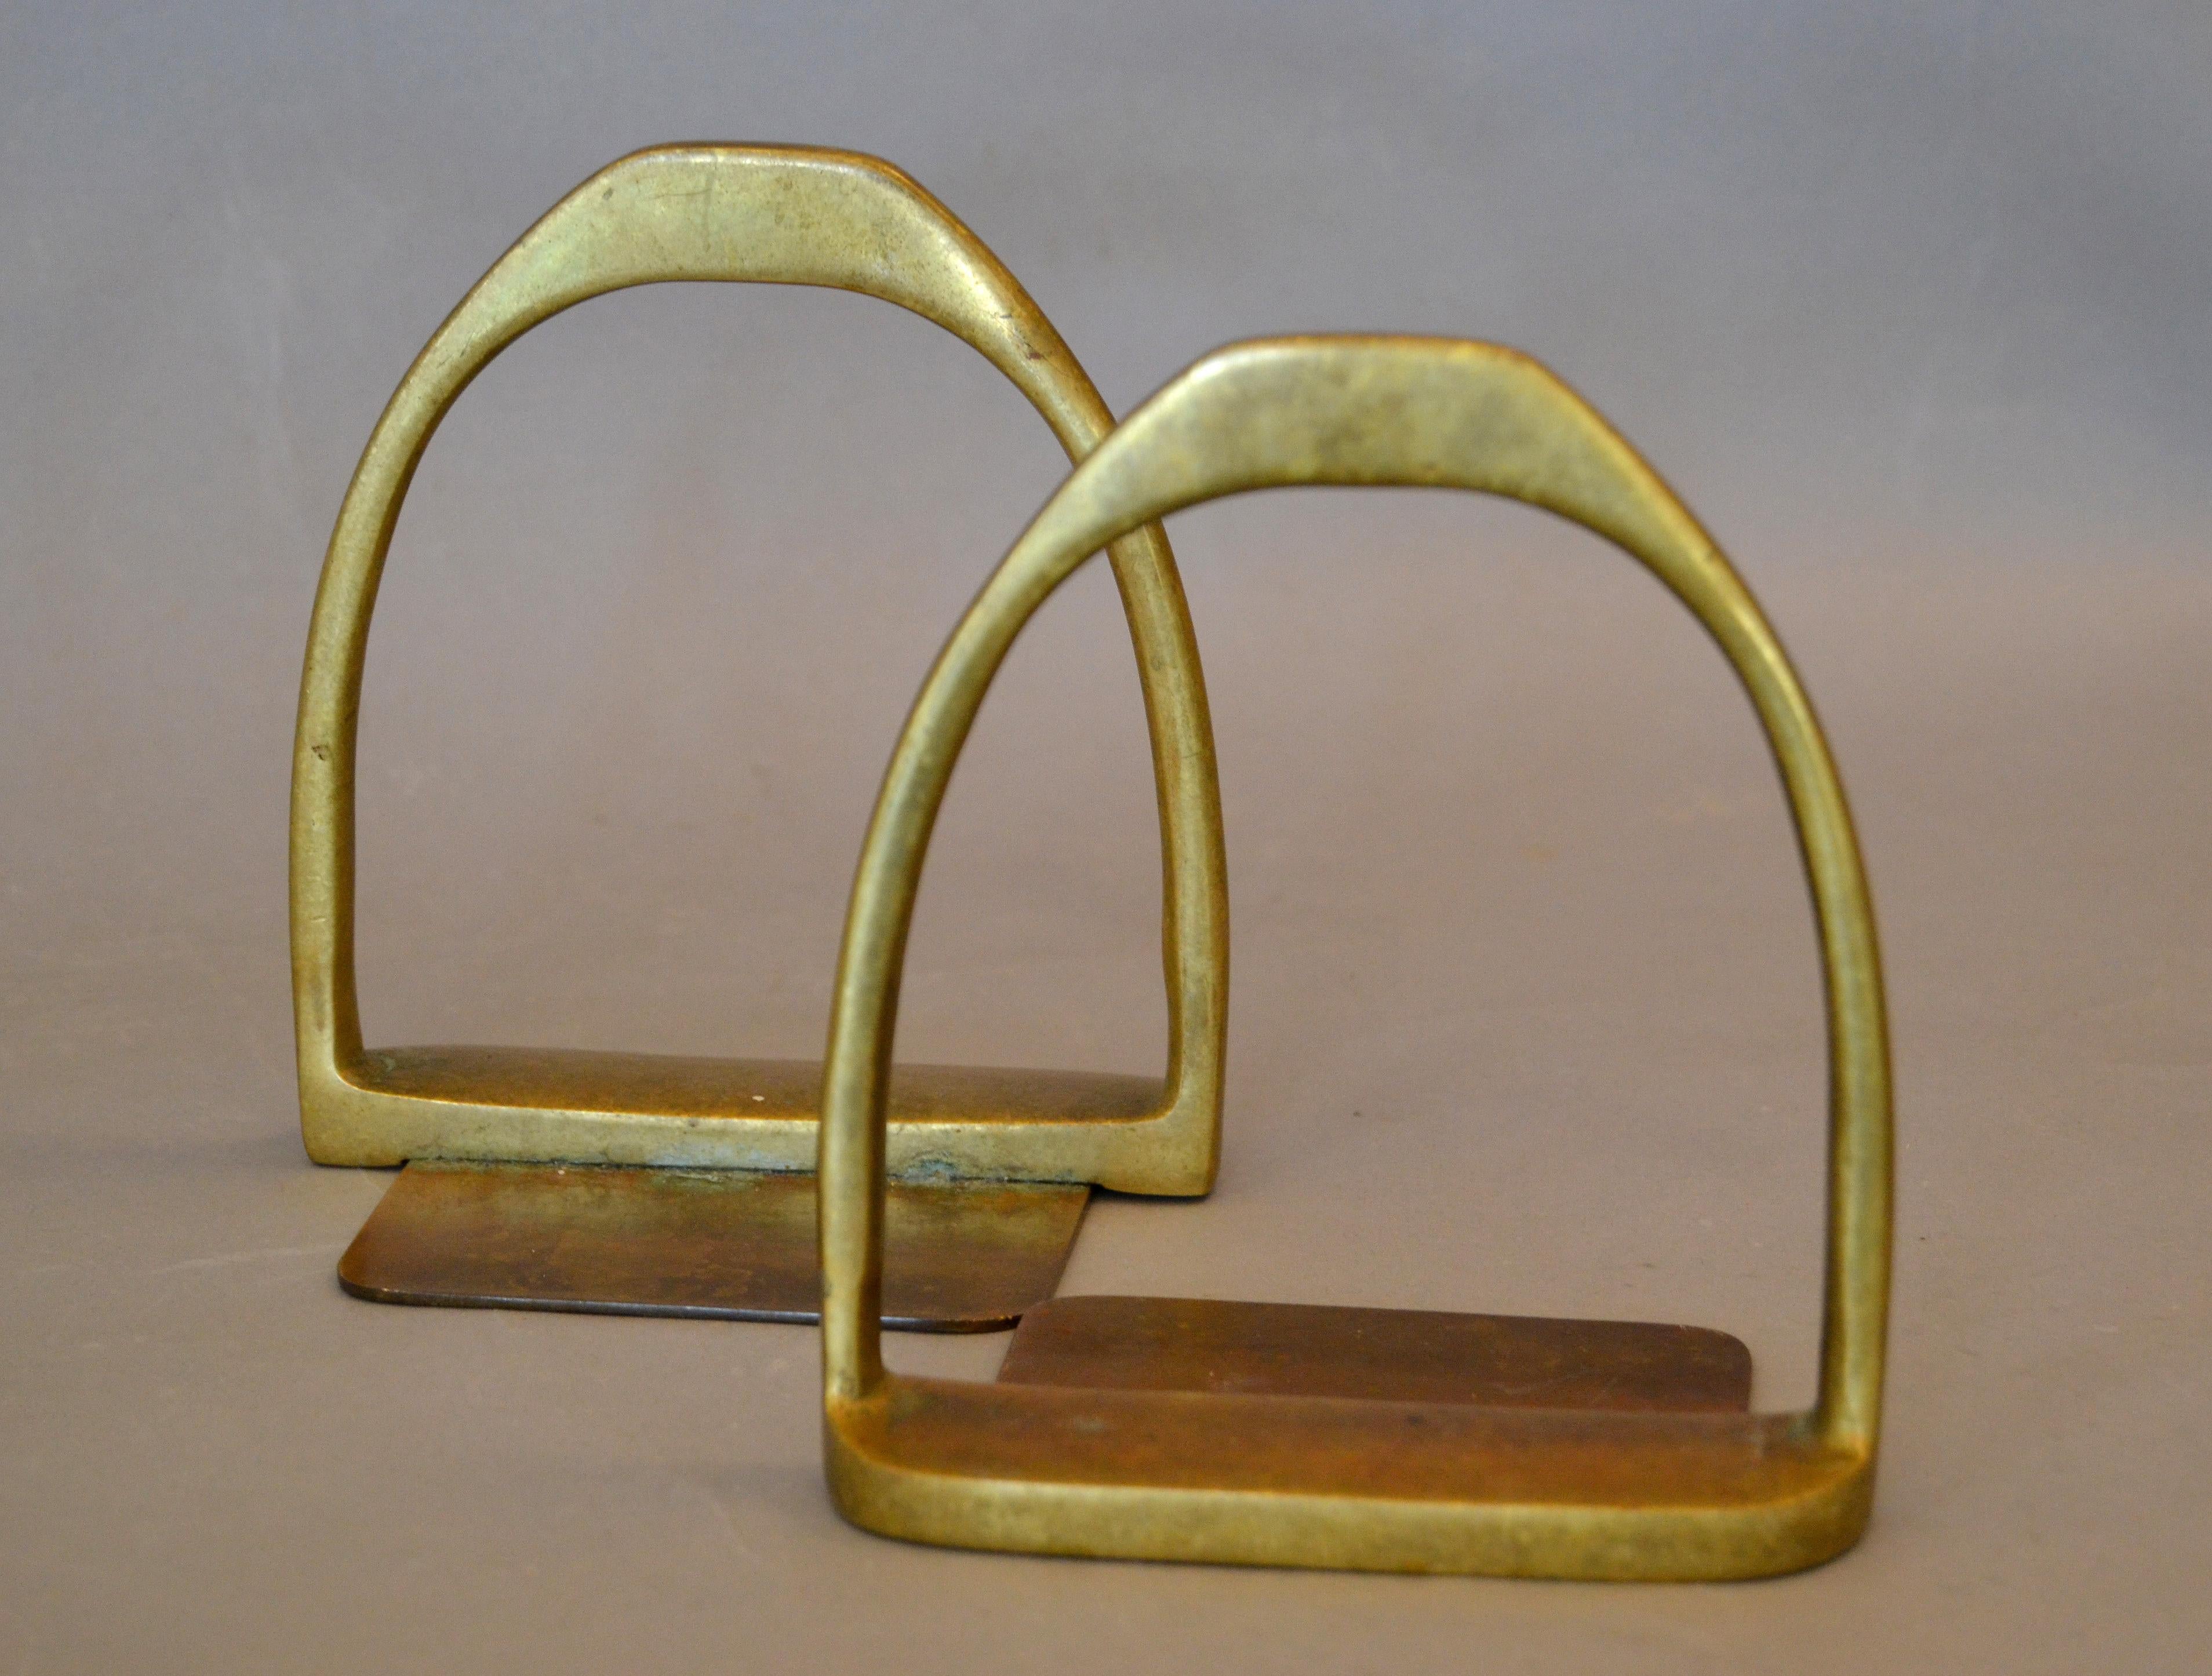 Late 20th Century English Country Style Handcrafted Brass Horse Saddle Stirrup Bookends, Pair